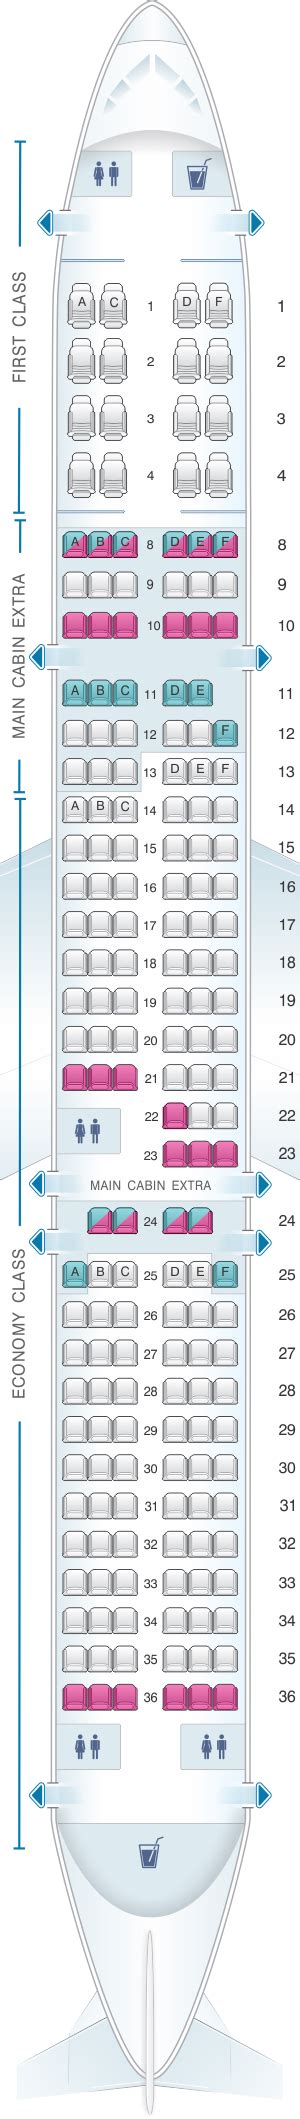 American Airlines should have ditched these planes years ago. Submitted by SeatGuru User on 2013/10/21 for Seat 6a. Seats very narrow and short arm rests dig into upper thighs for anyone close to full-grown adult. Flight was over 2 hours (on-time), but these should be avoided for anything over an hour.. 